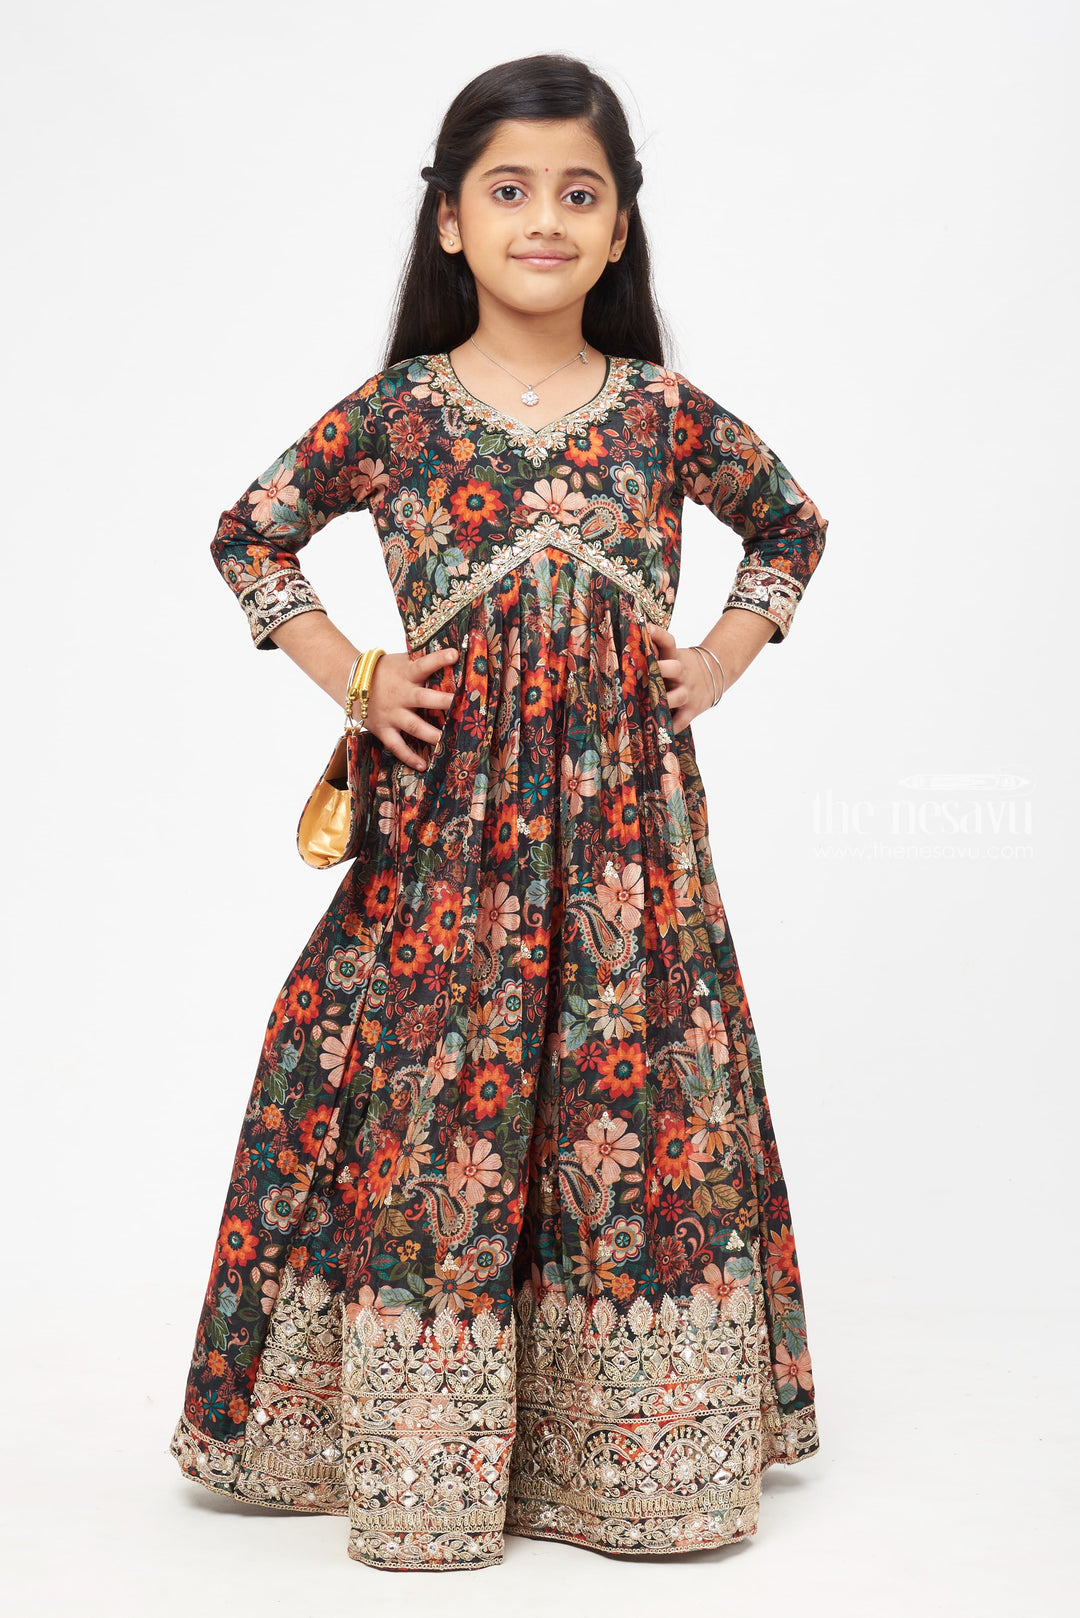 The Nesavu Girls Party Gown Regal Botanical Diwali Anarkali Gown with Intricate Silver Accents for Girls Nesavu 16 (1Y) / Green / Organza Printed GA172A-16 Floral Designer Anarkali Gown | Diwali Special Festive Collection for Girls | The Nesavu